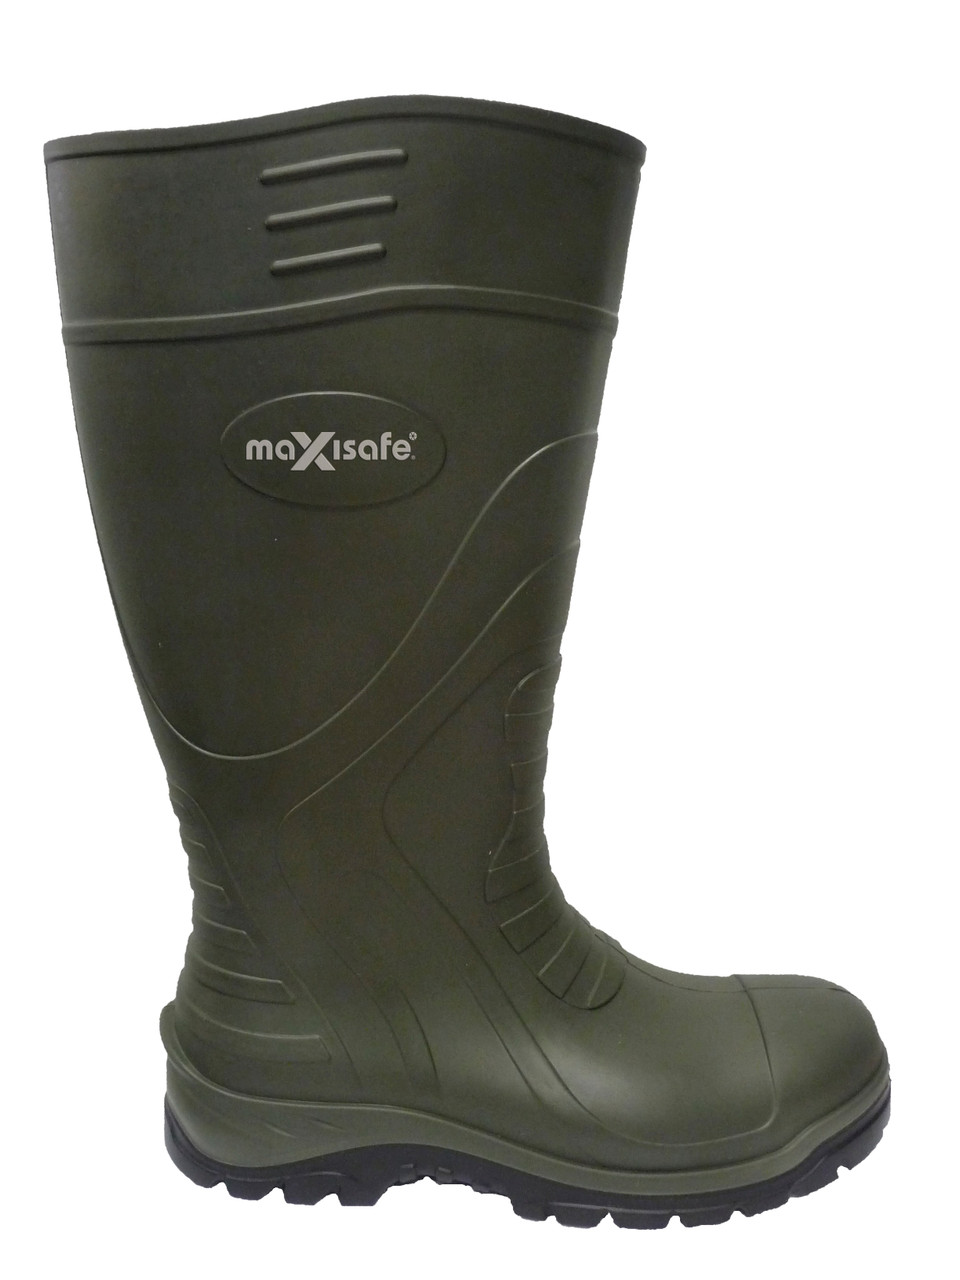 Patrol Green Pu Boot W/ Safety Toe, Size 6